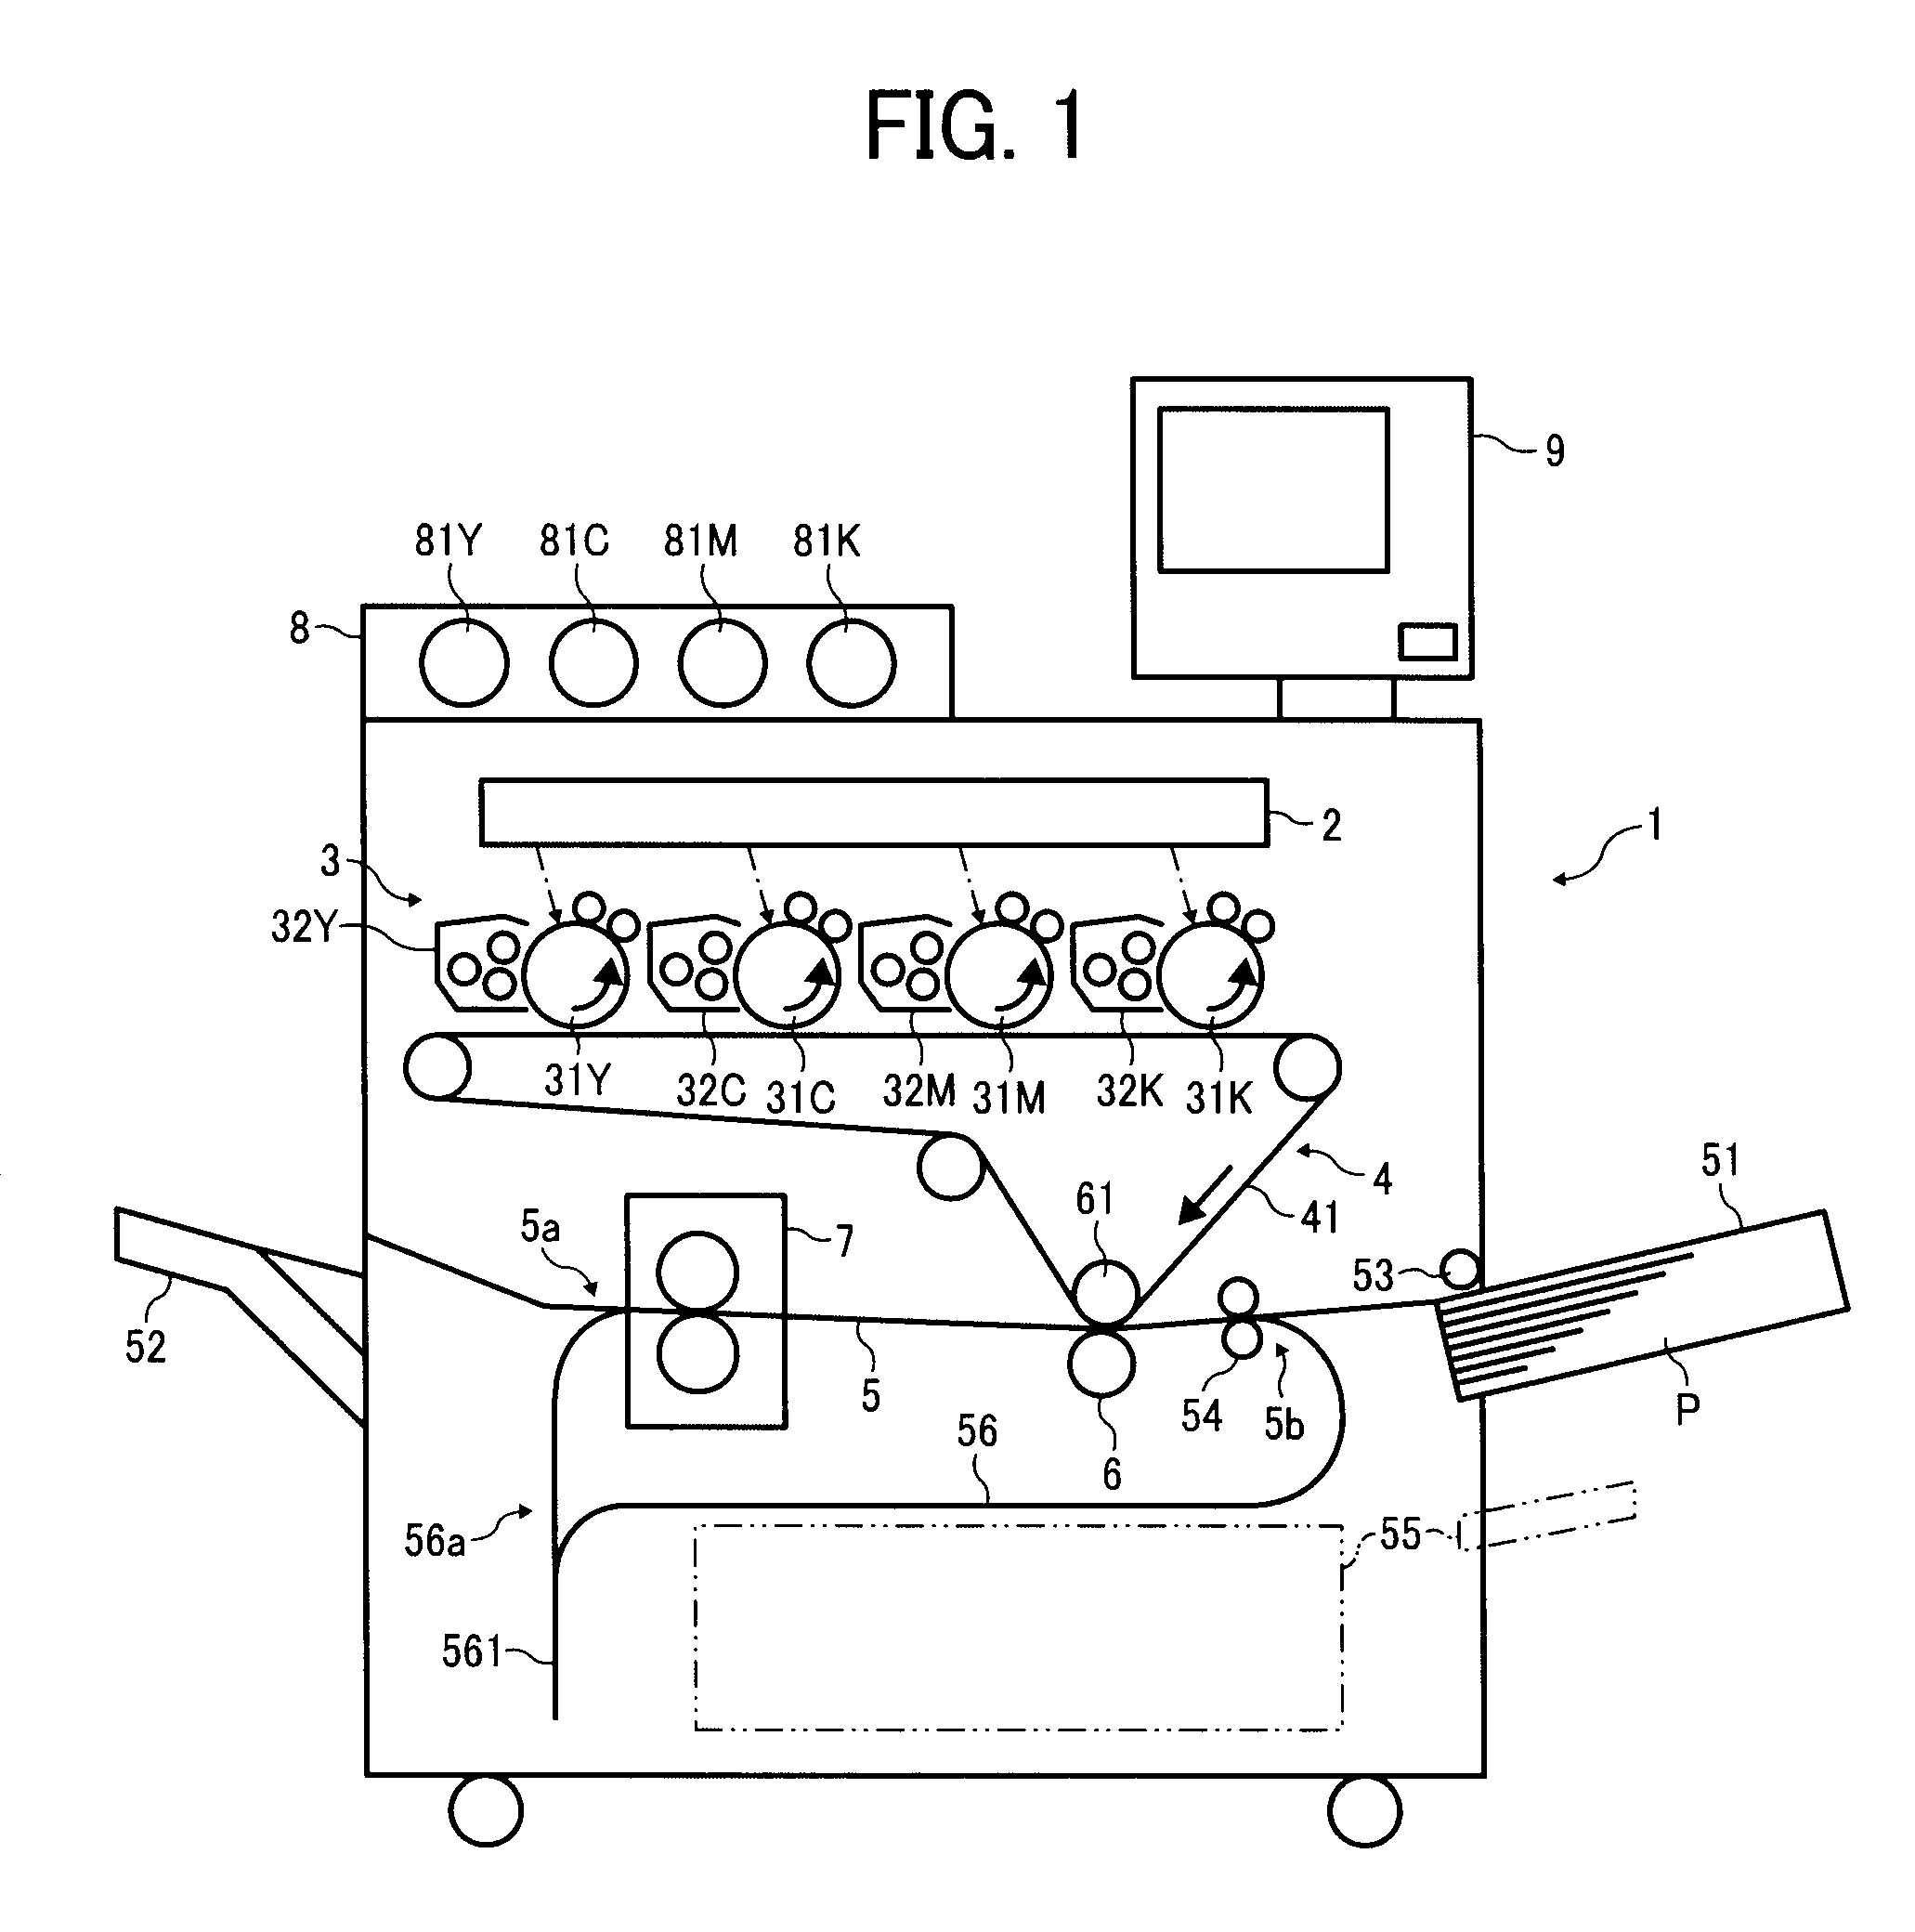 Image forming apparatus having improved serviceability